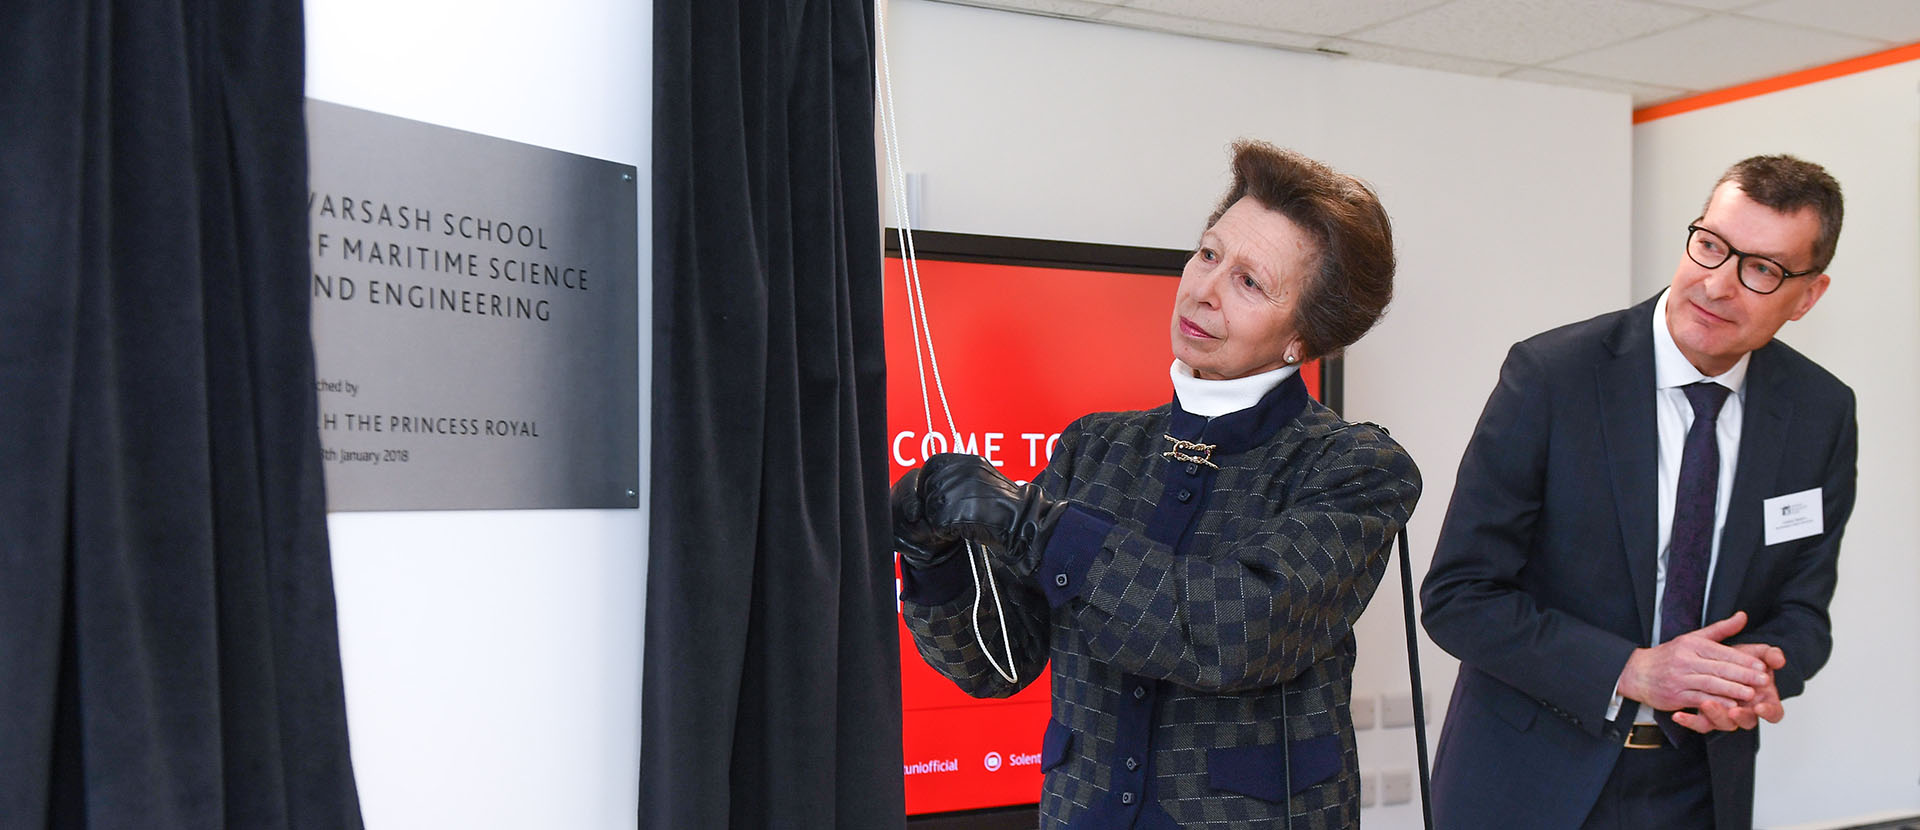 Her Royal Highness The Princess Royal opening St Marys